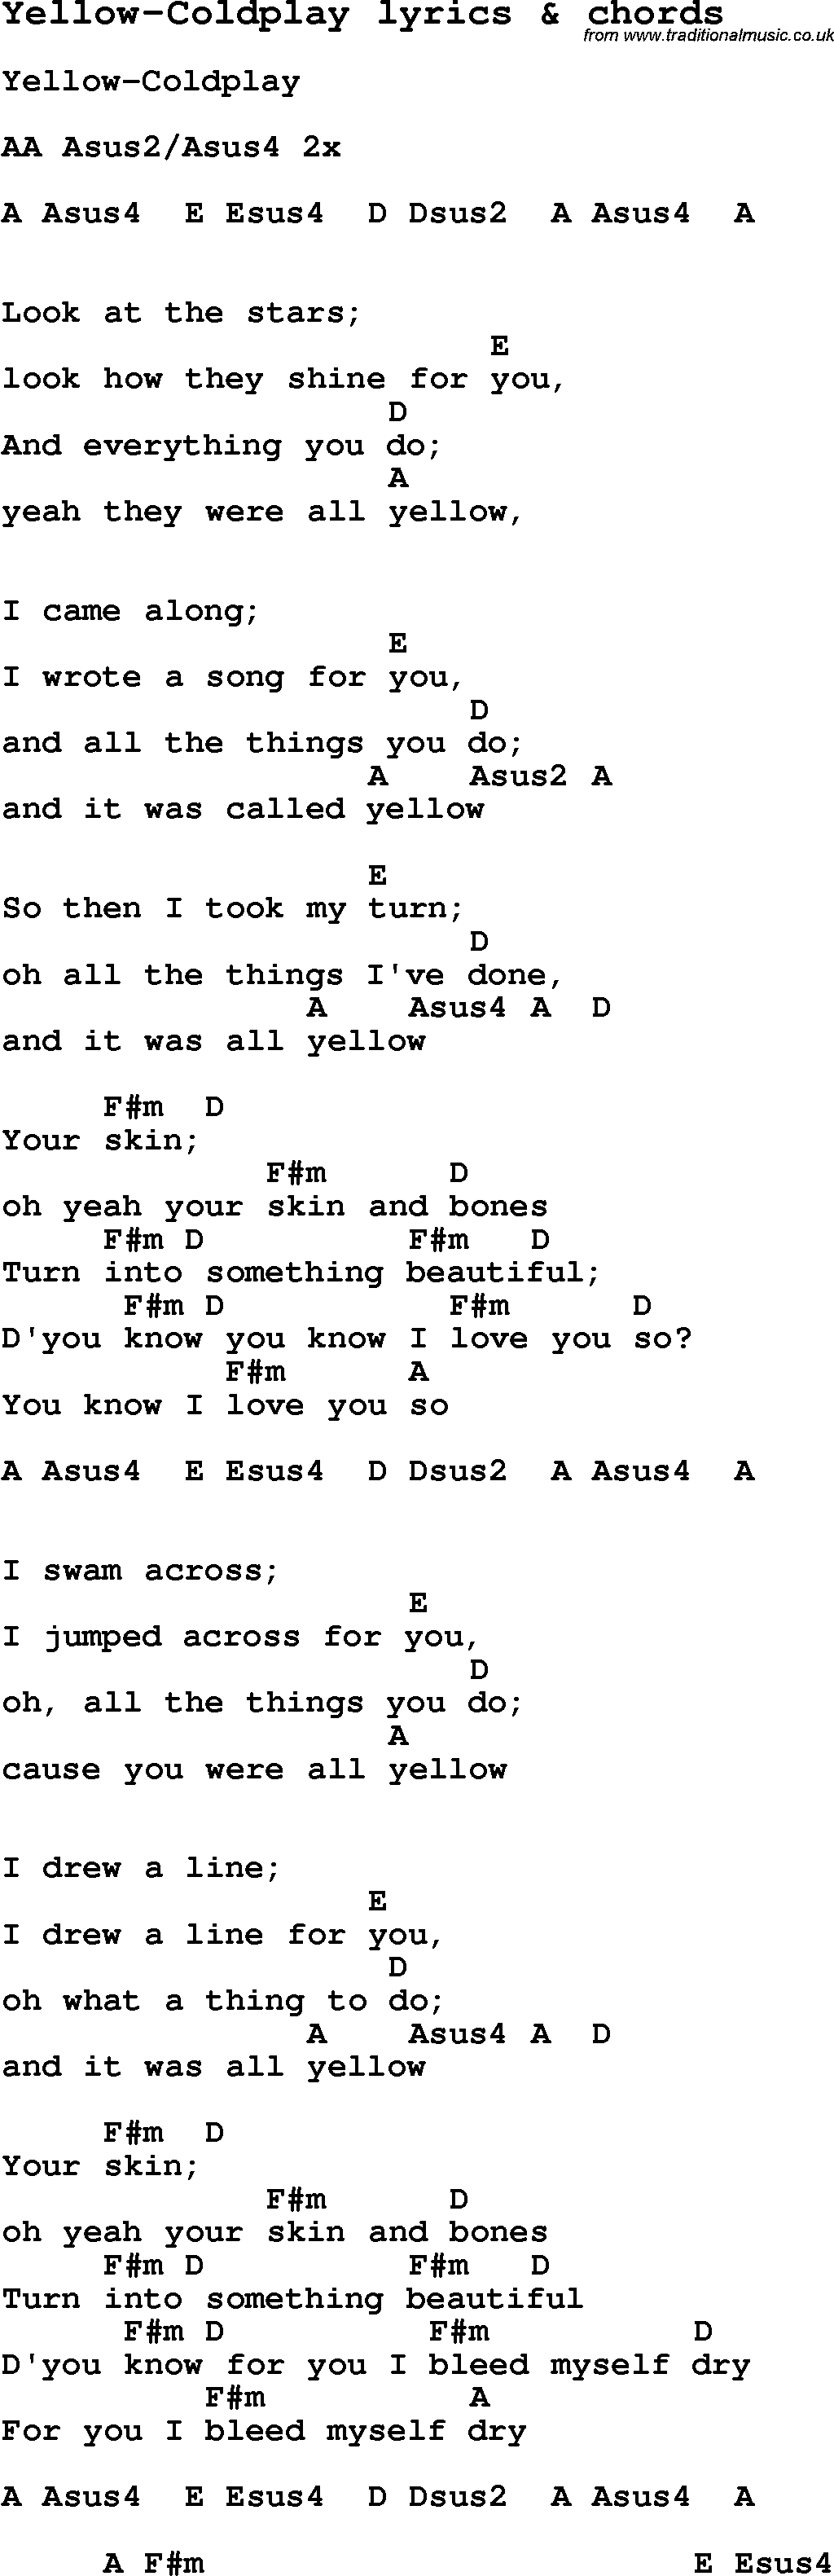 Love Song Lyrics for: Yellow-Coldplay with chords for Ukulele, Guitar Banjo etc.